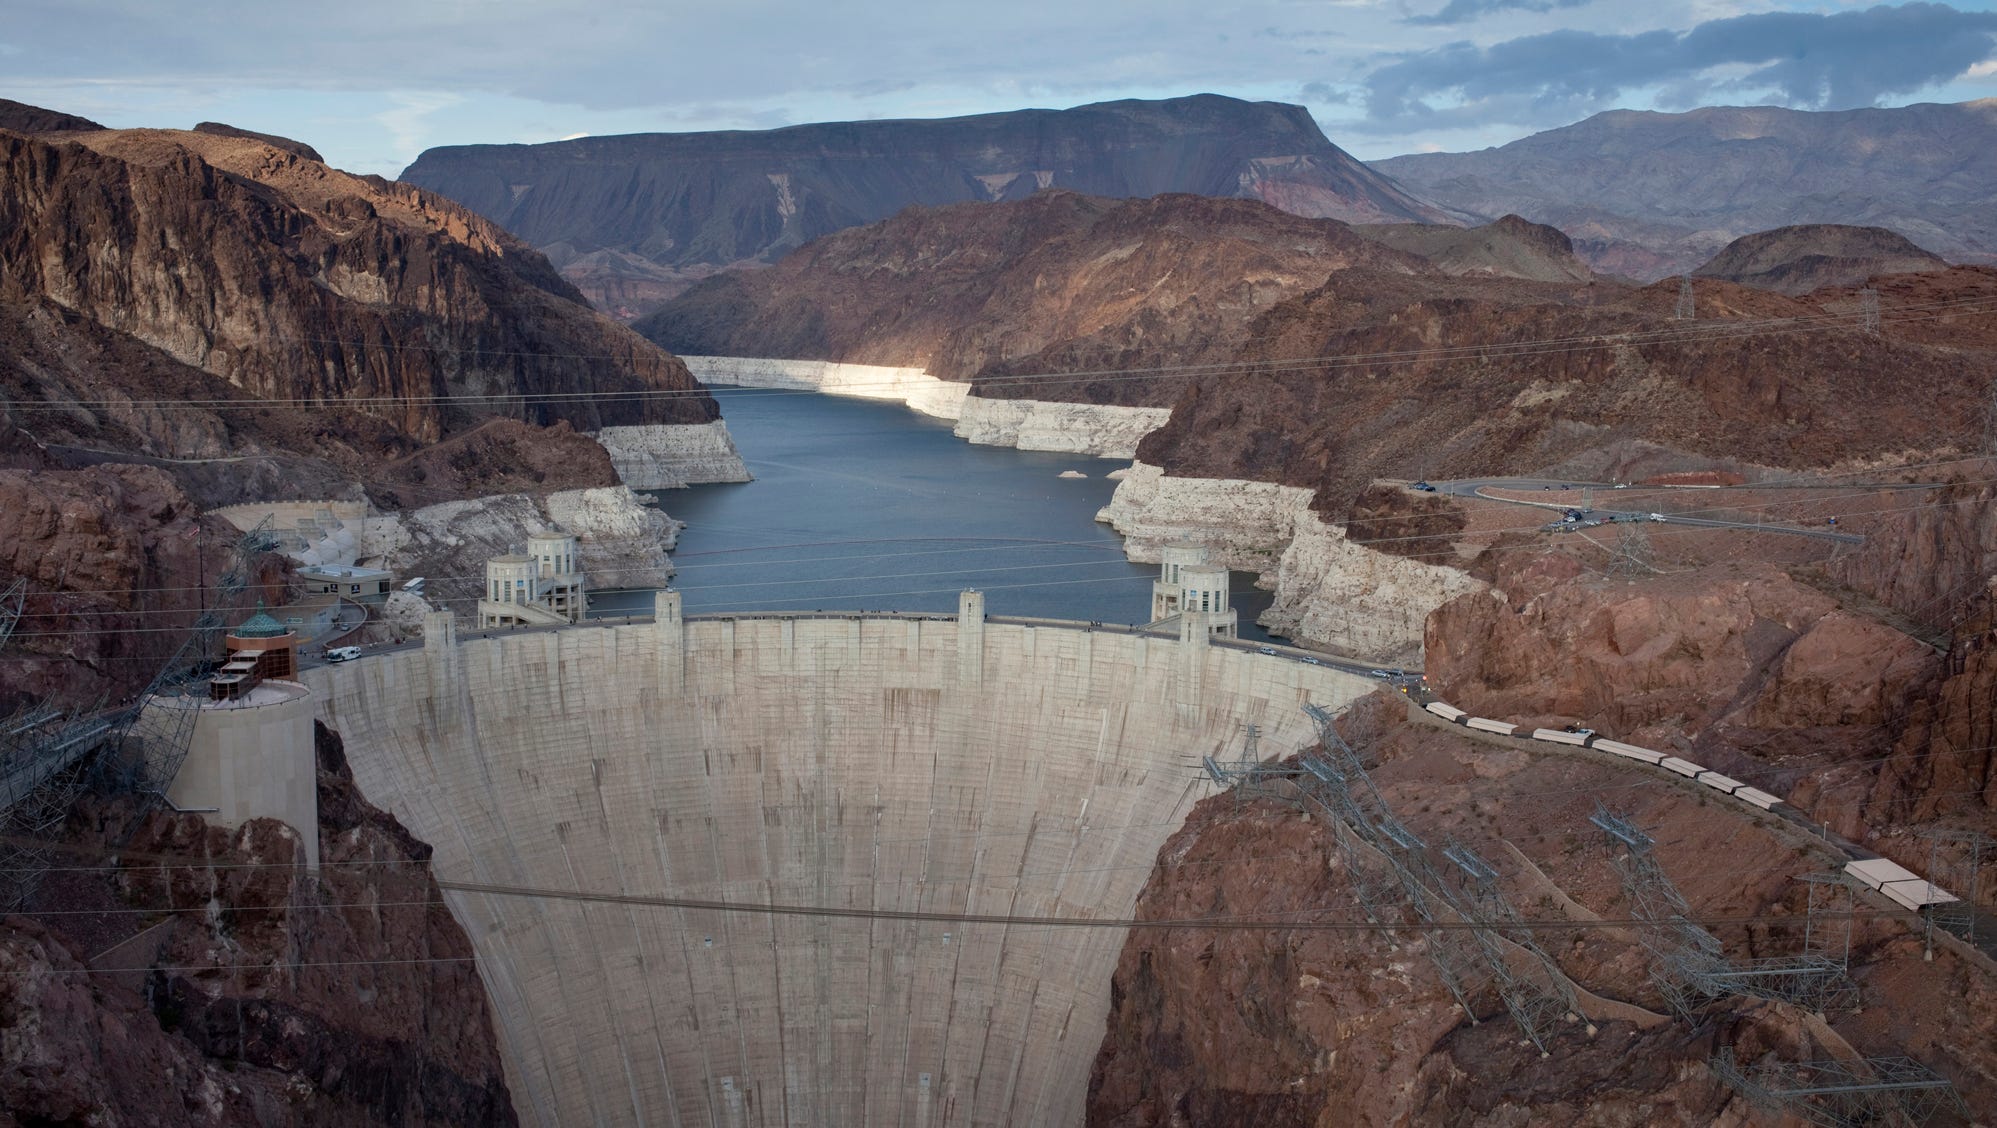 'The pie keeps shrinking': Lake Mead's low level will trigger water cutbacks for Arizona, Nevada - AZCentral